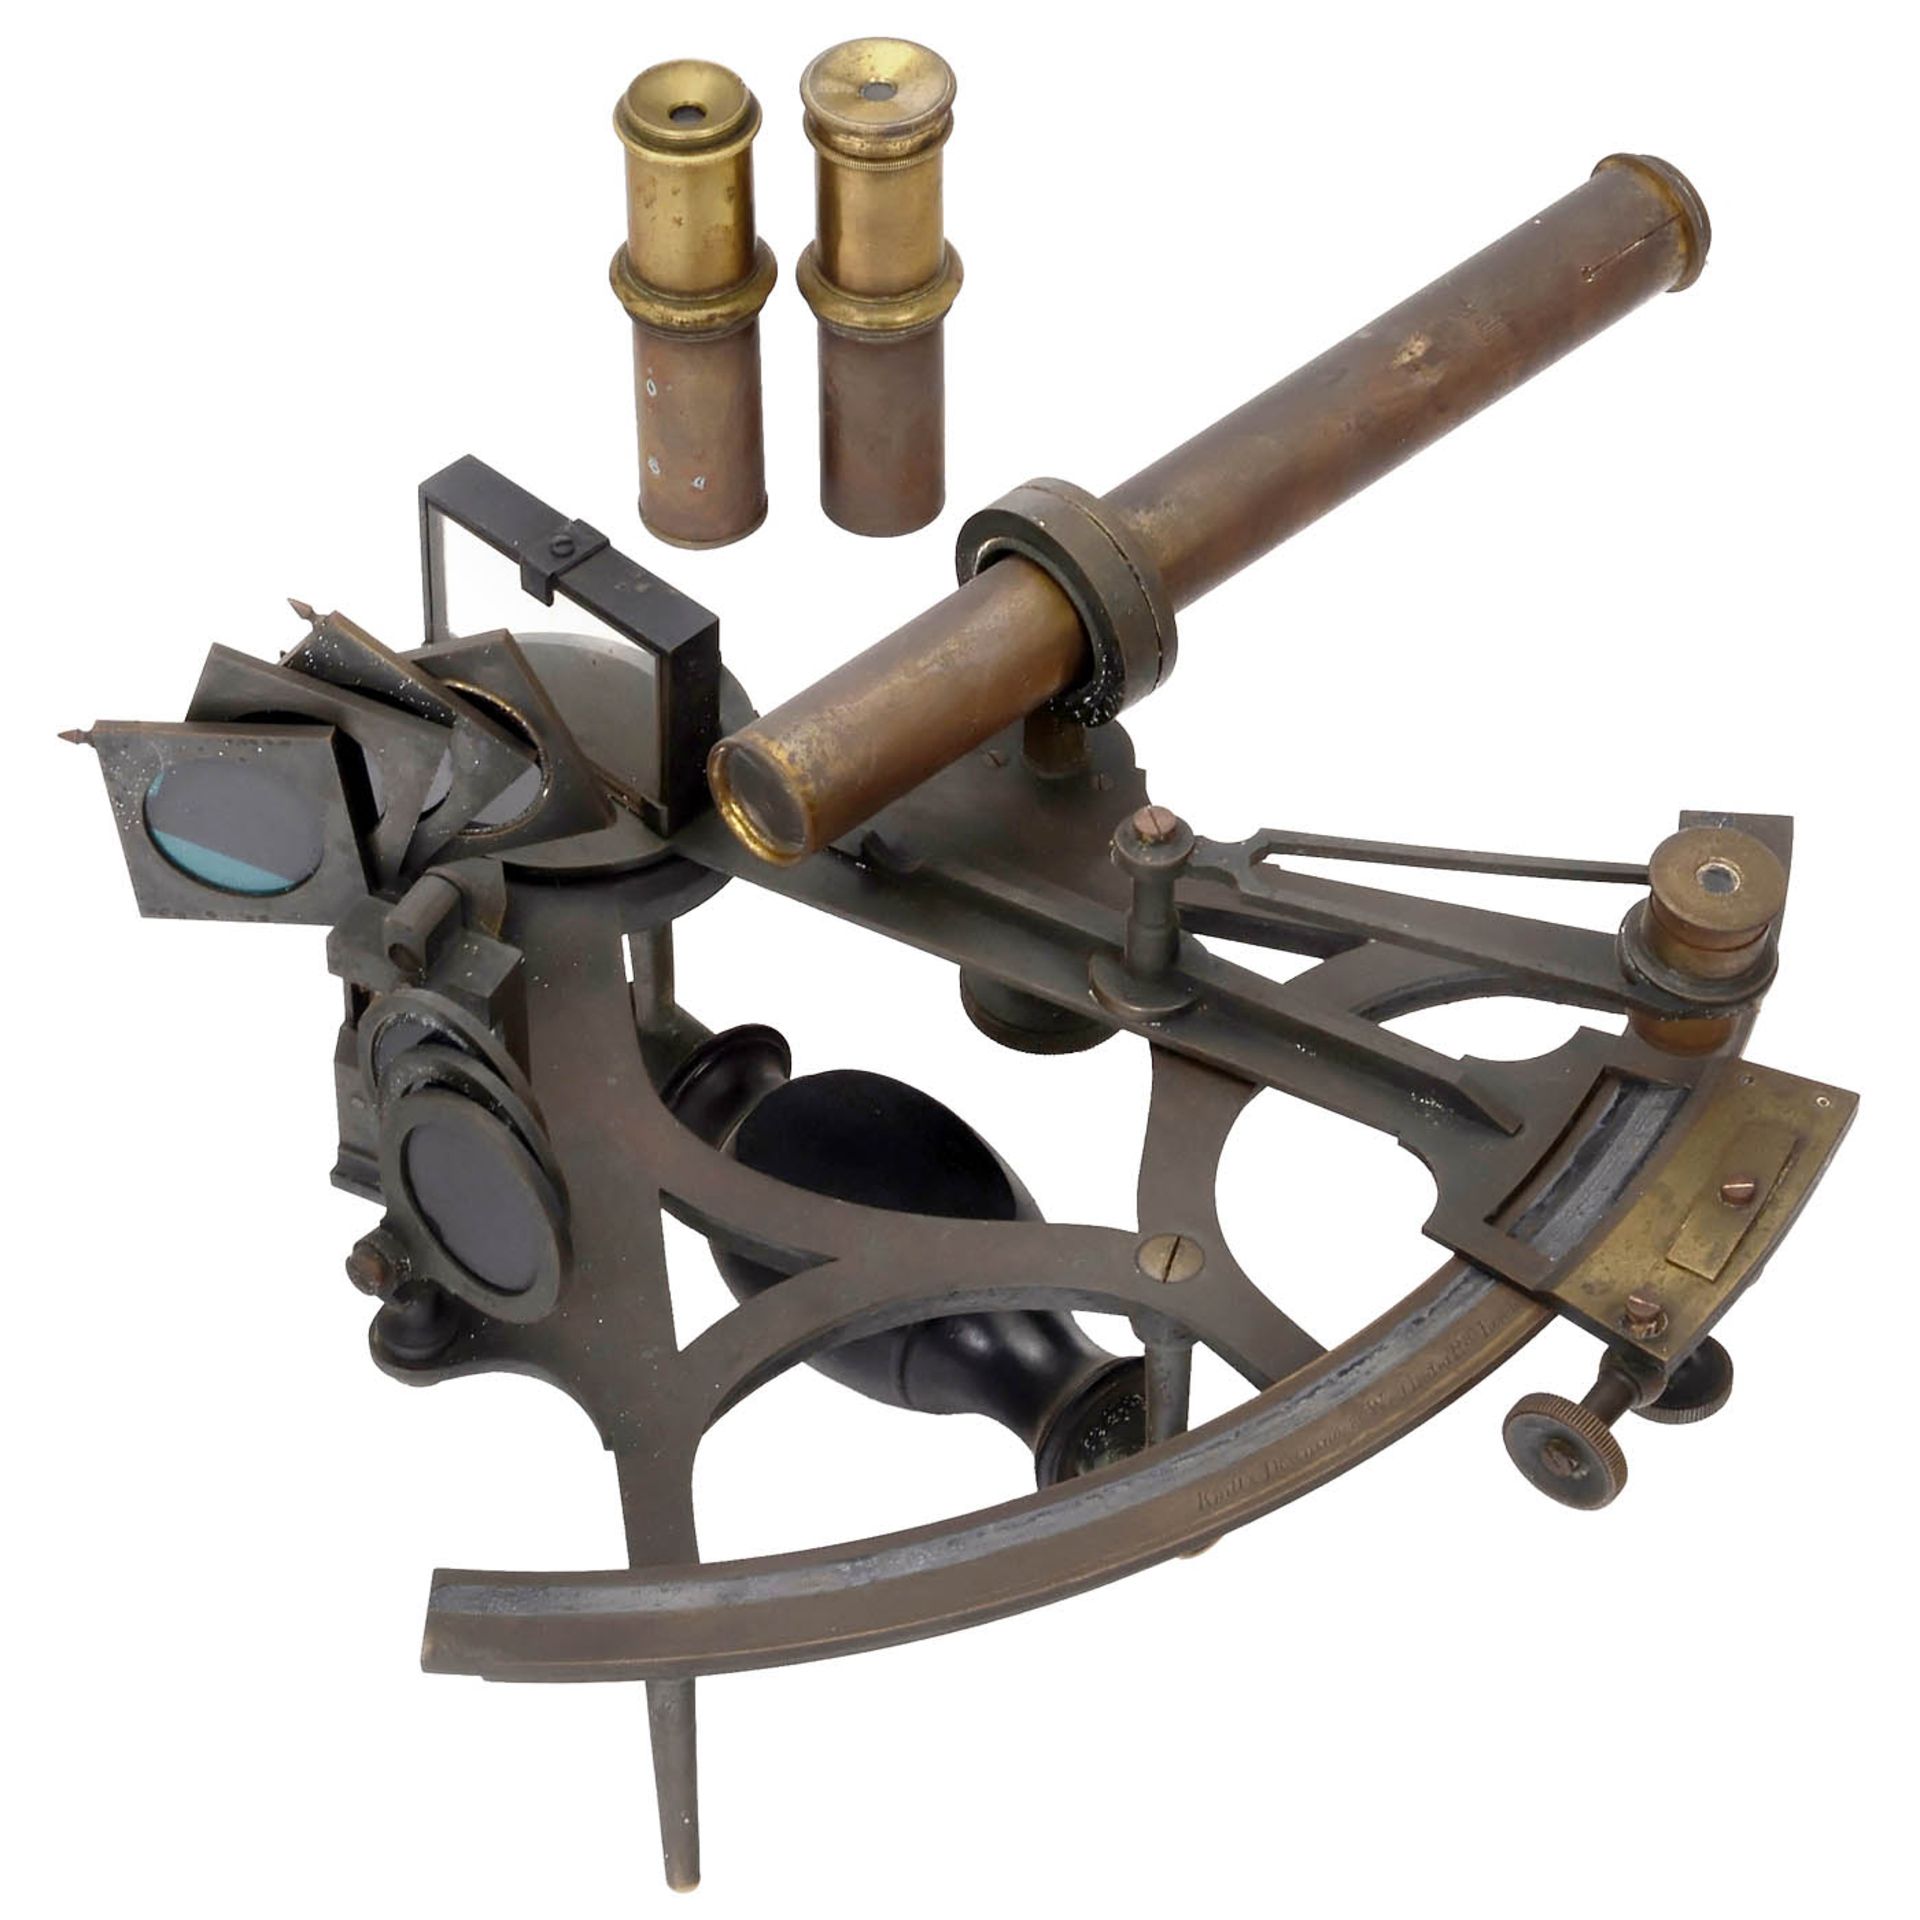 English Sextant by Knill & Downing, c. 1880